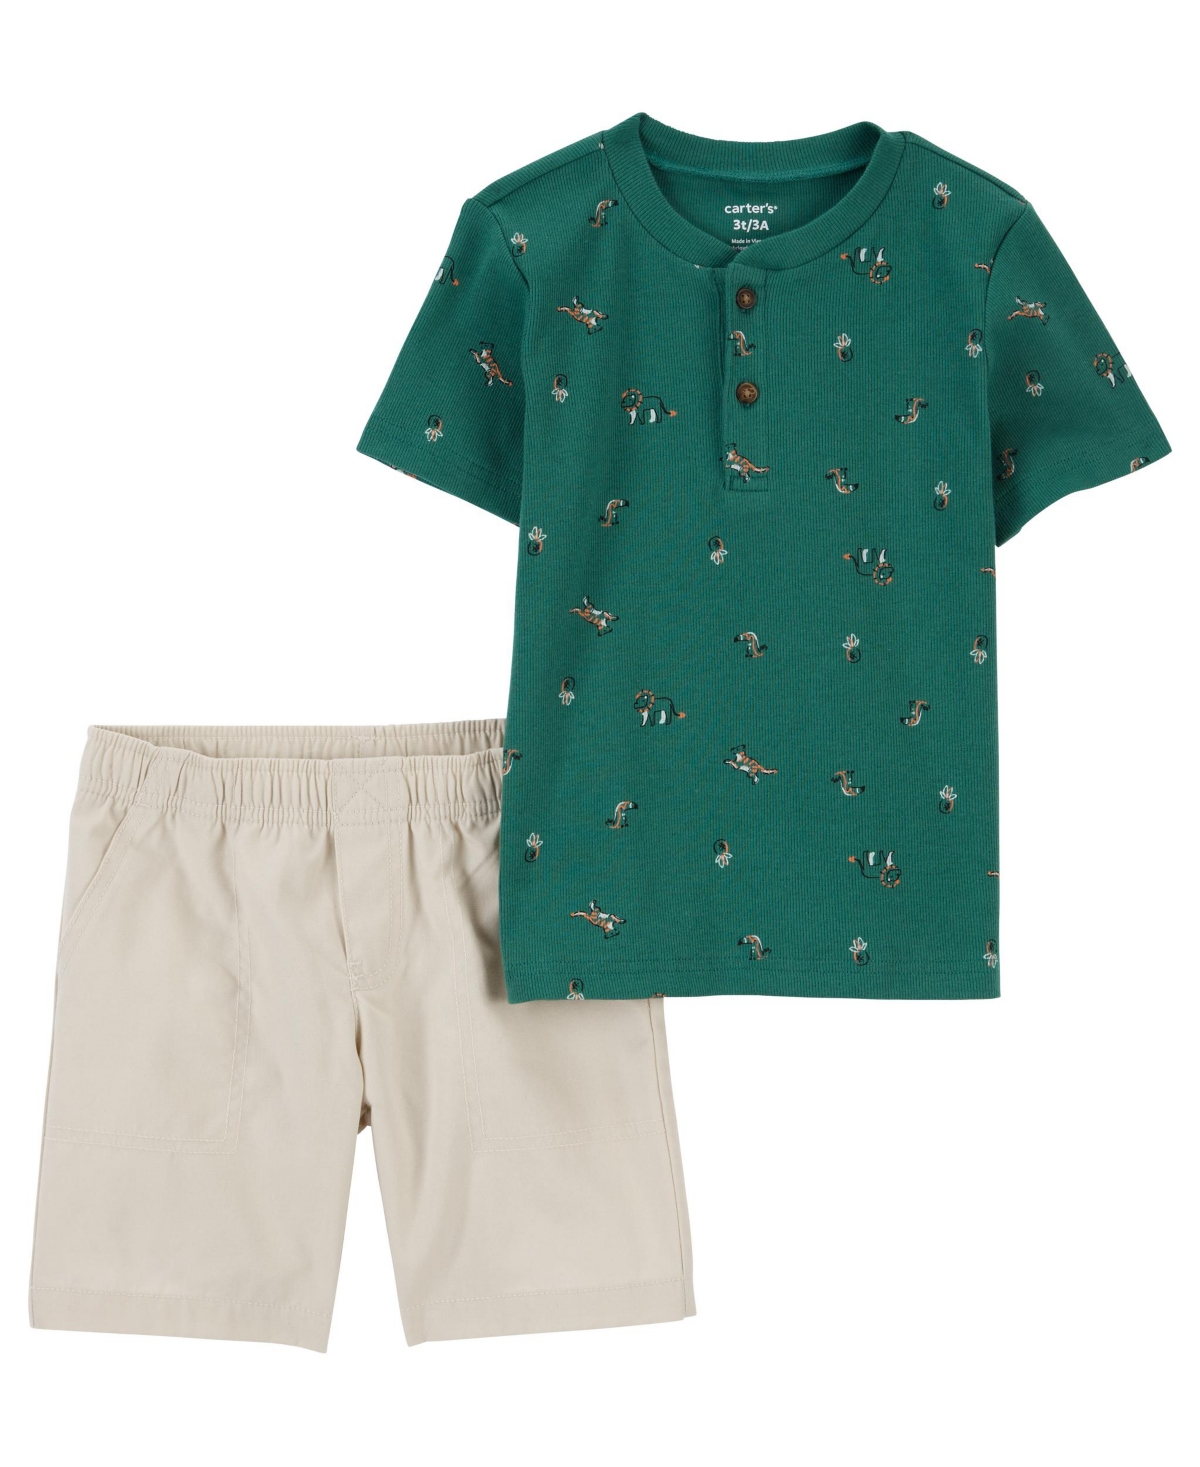 Shop Carter's Baby Boys Shirt And Shorts, 2 Piece Set In Green